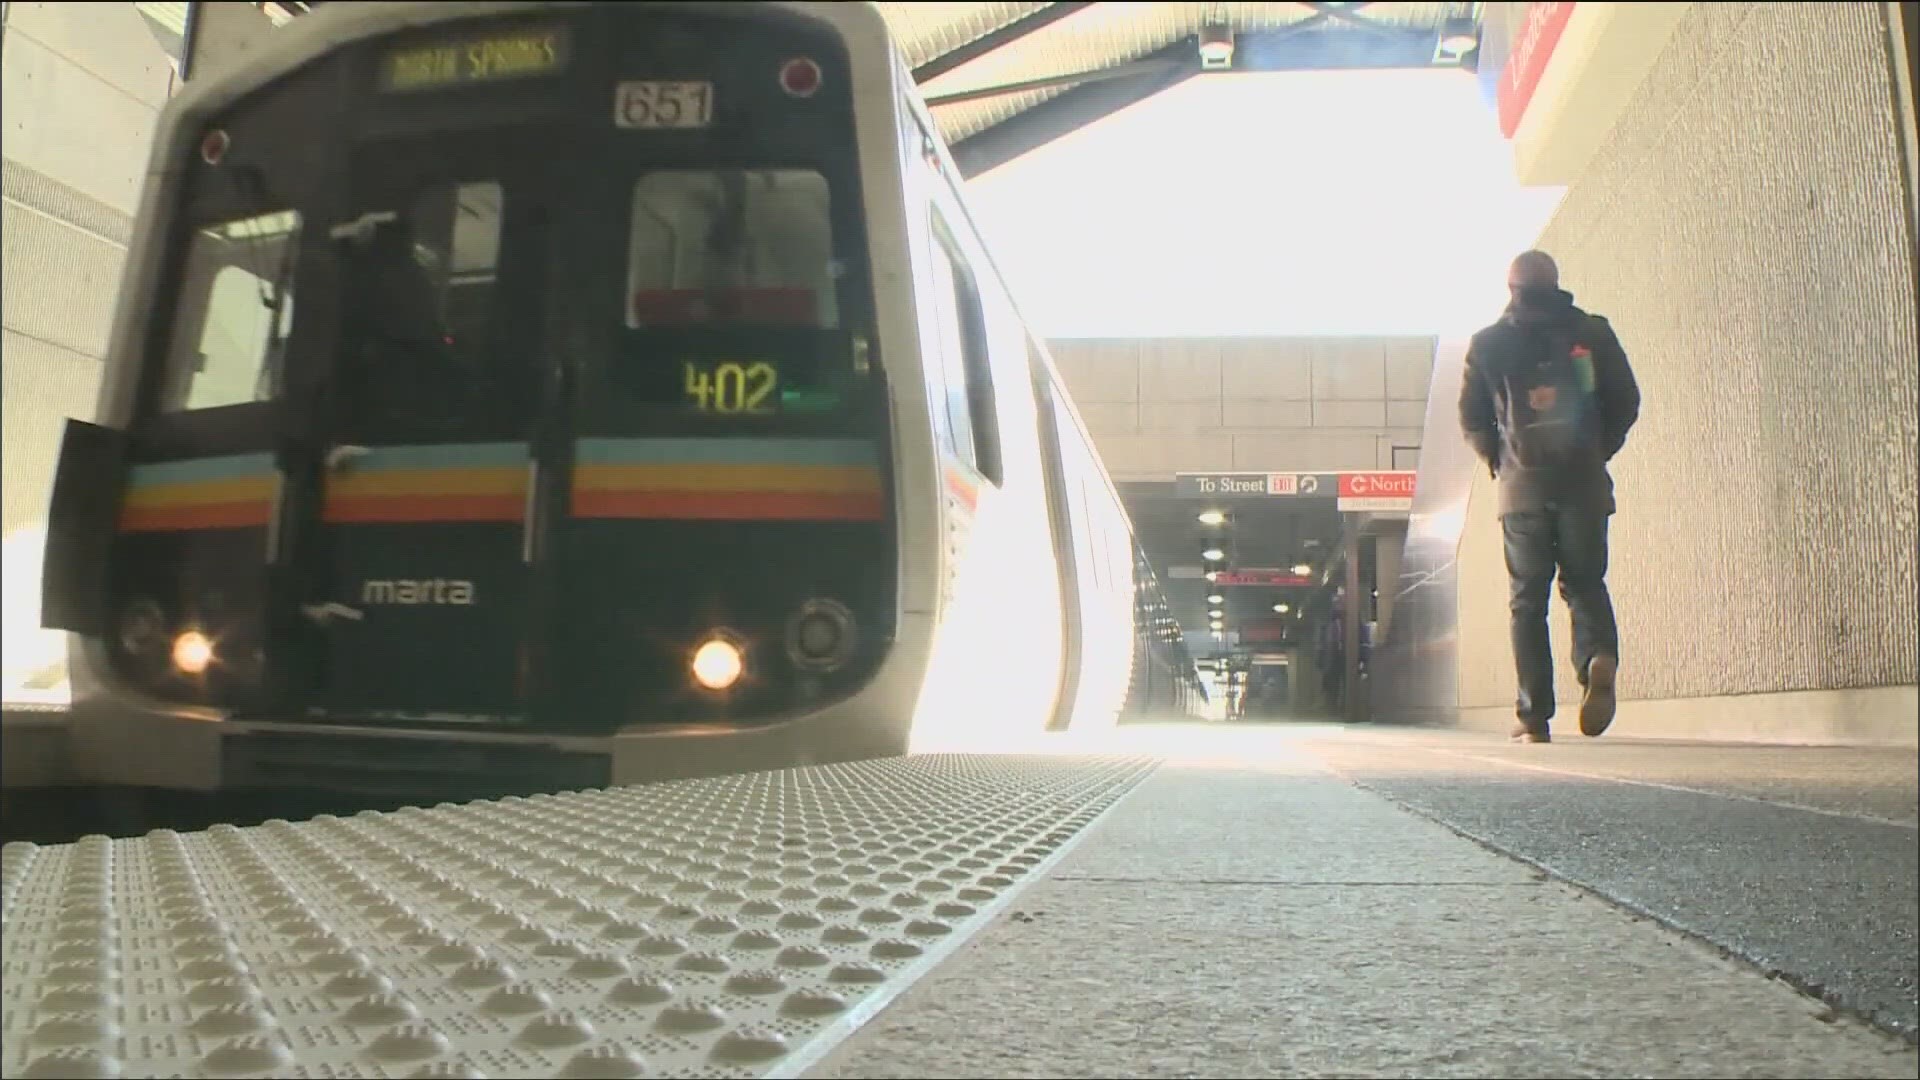 MARTA says you should prep for an extra 10-15 minutes to reach your destination.